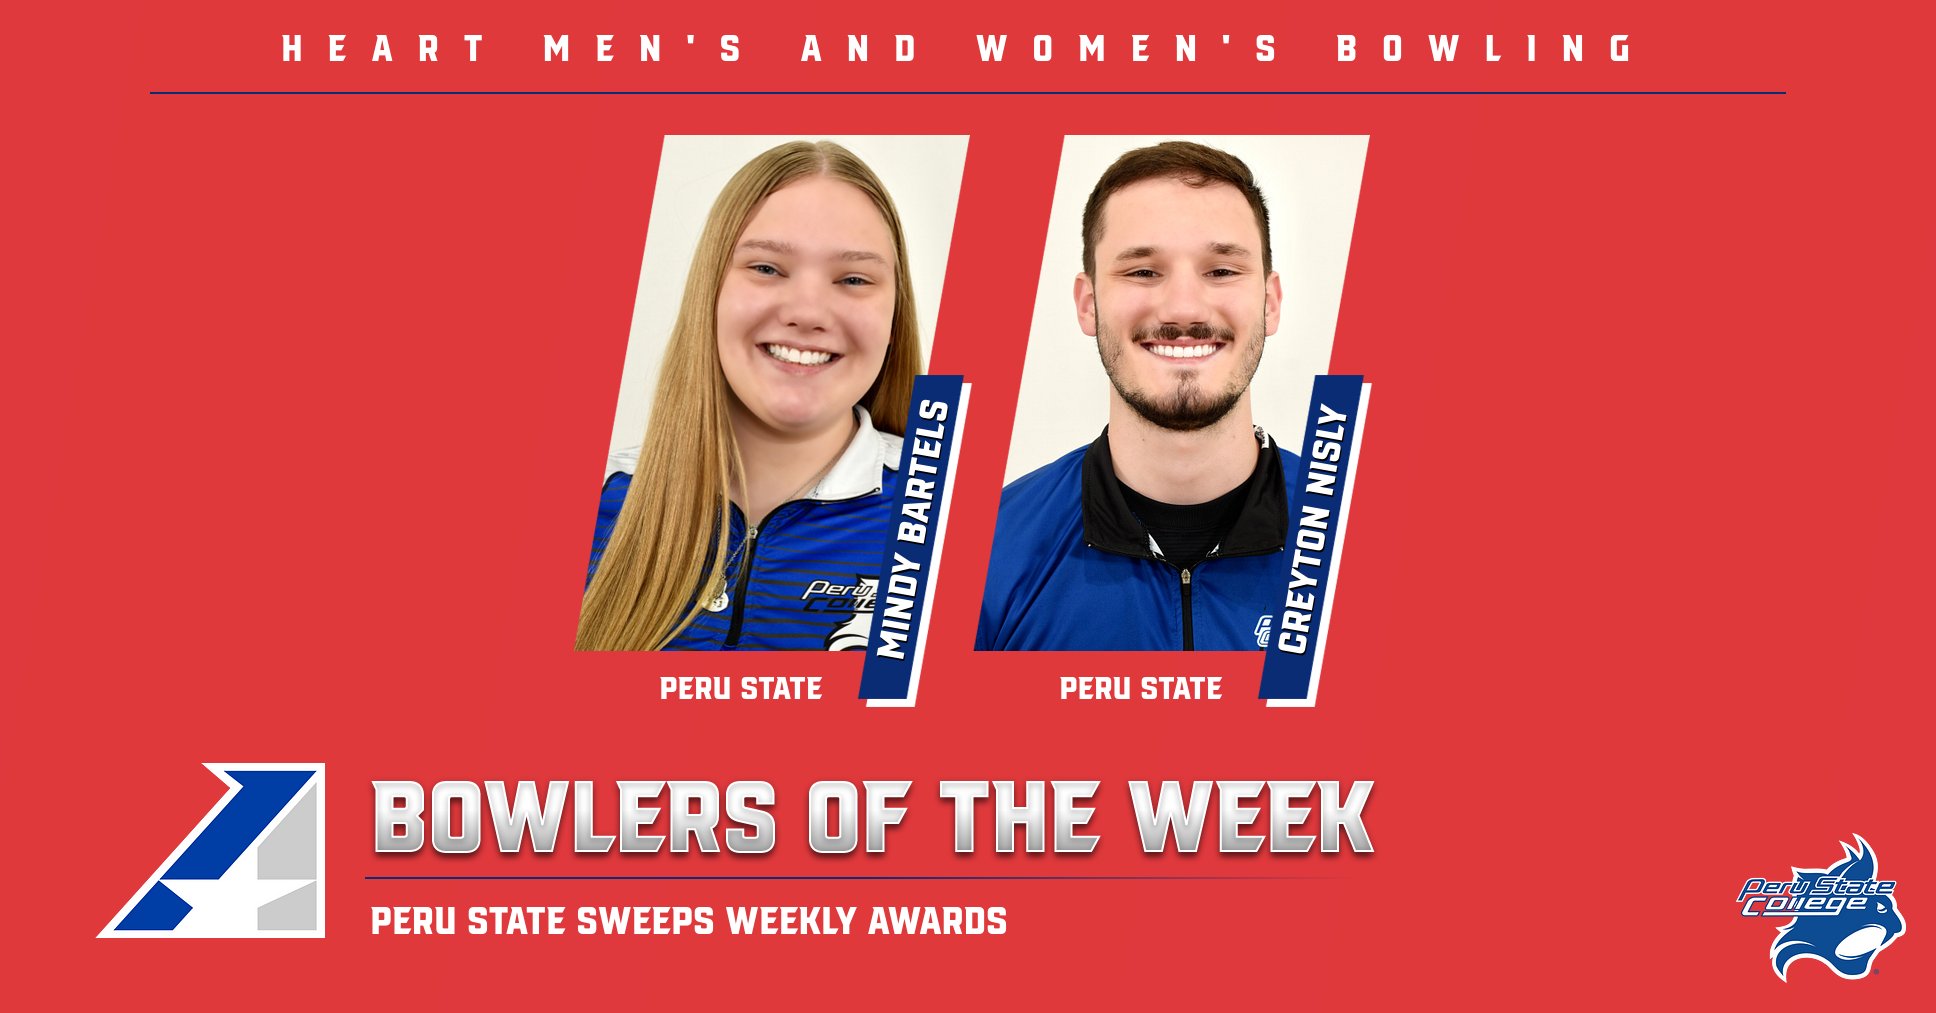 Peru State Sweeps Heart Bowler of the Week Awards